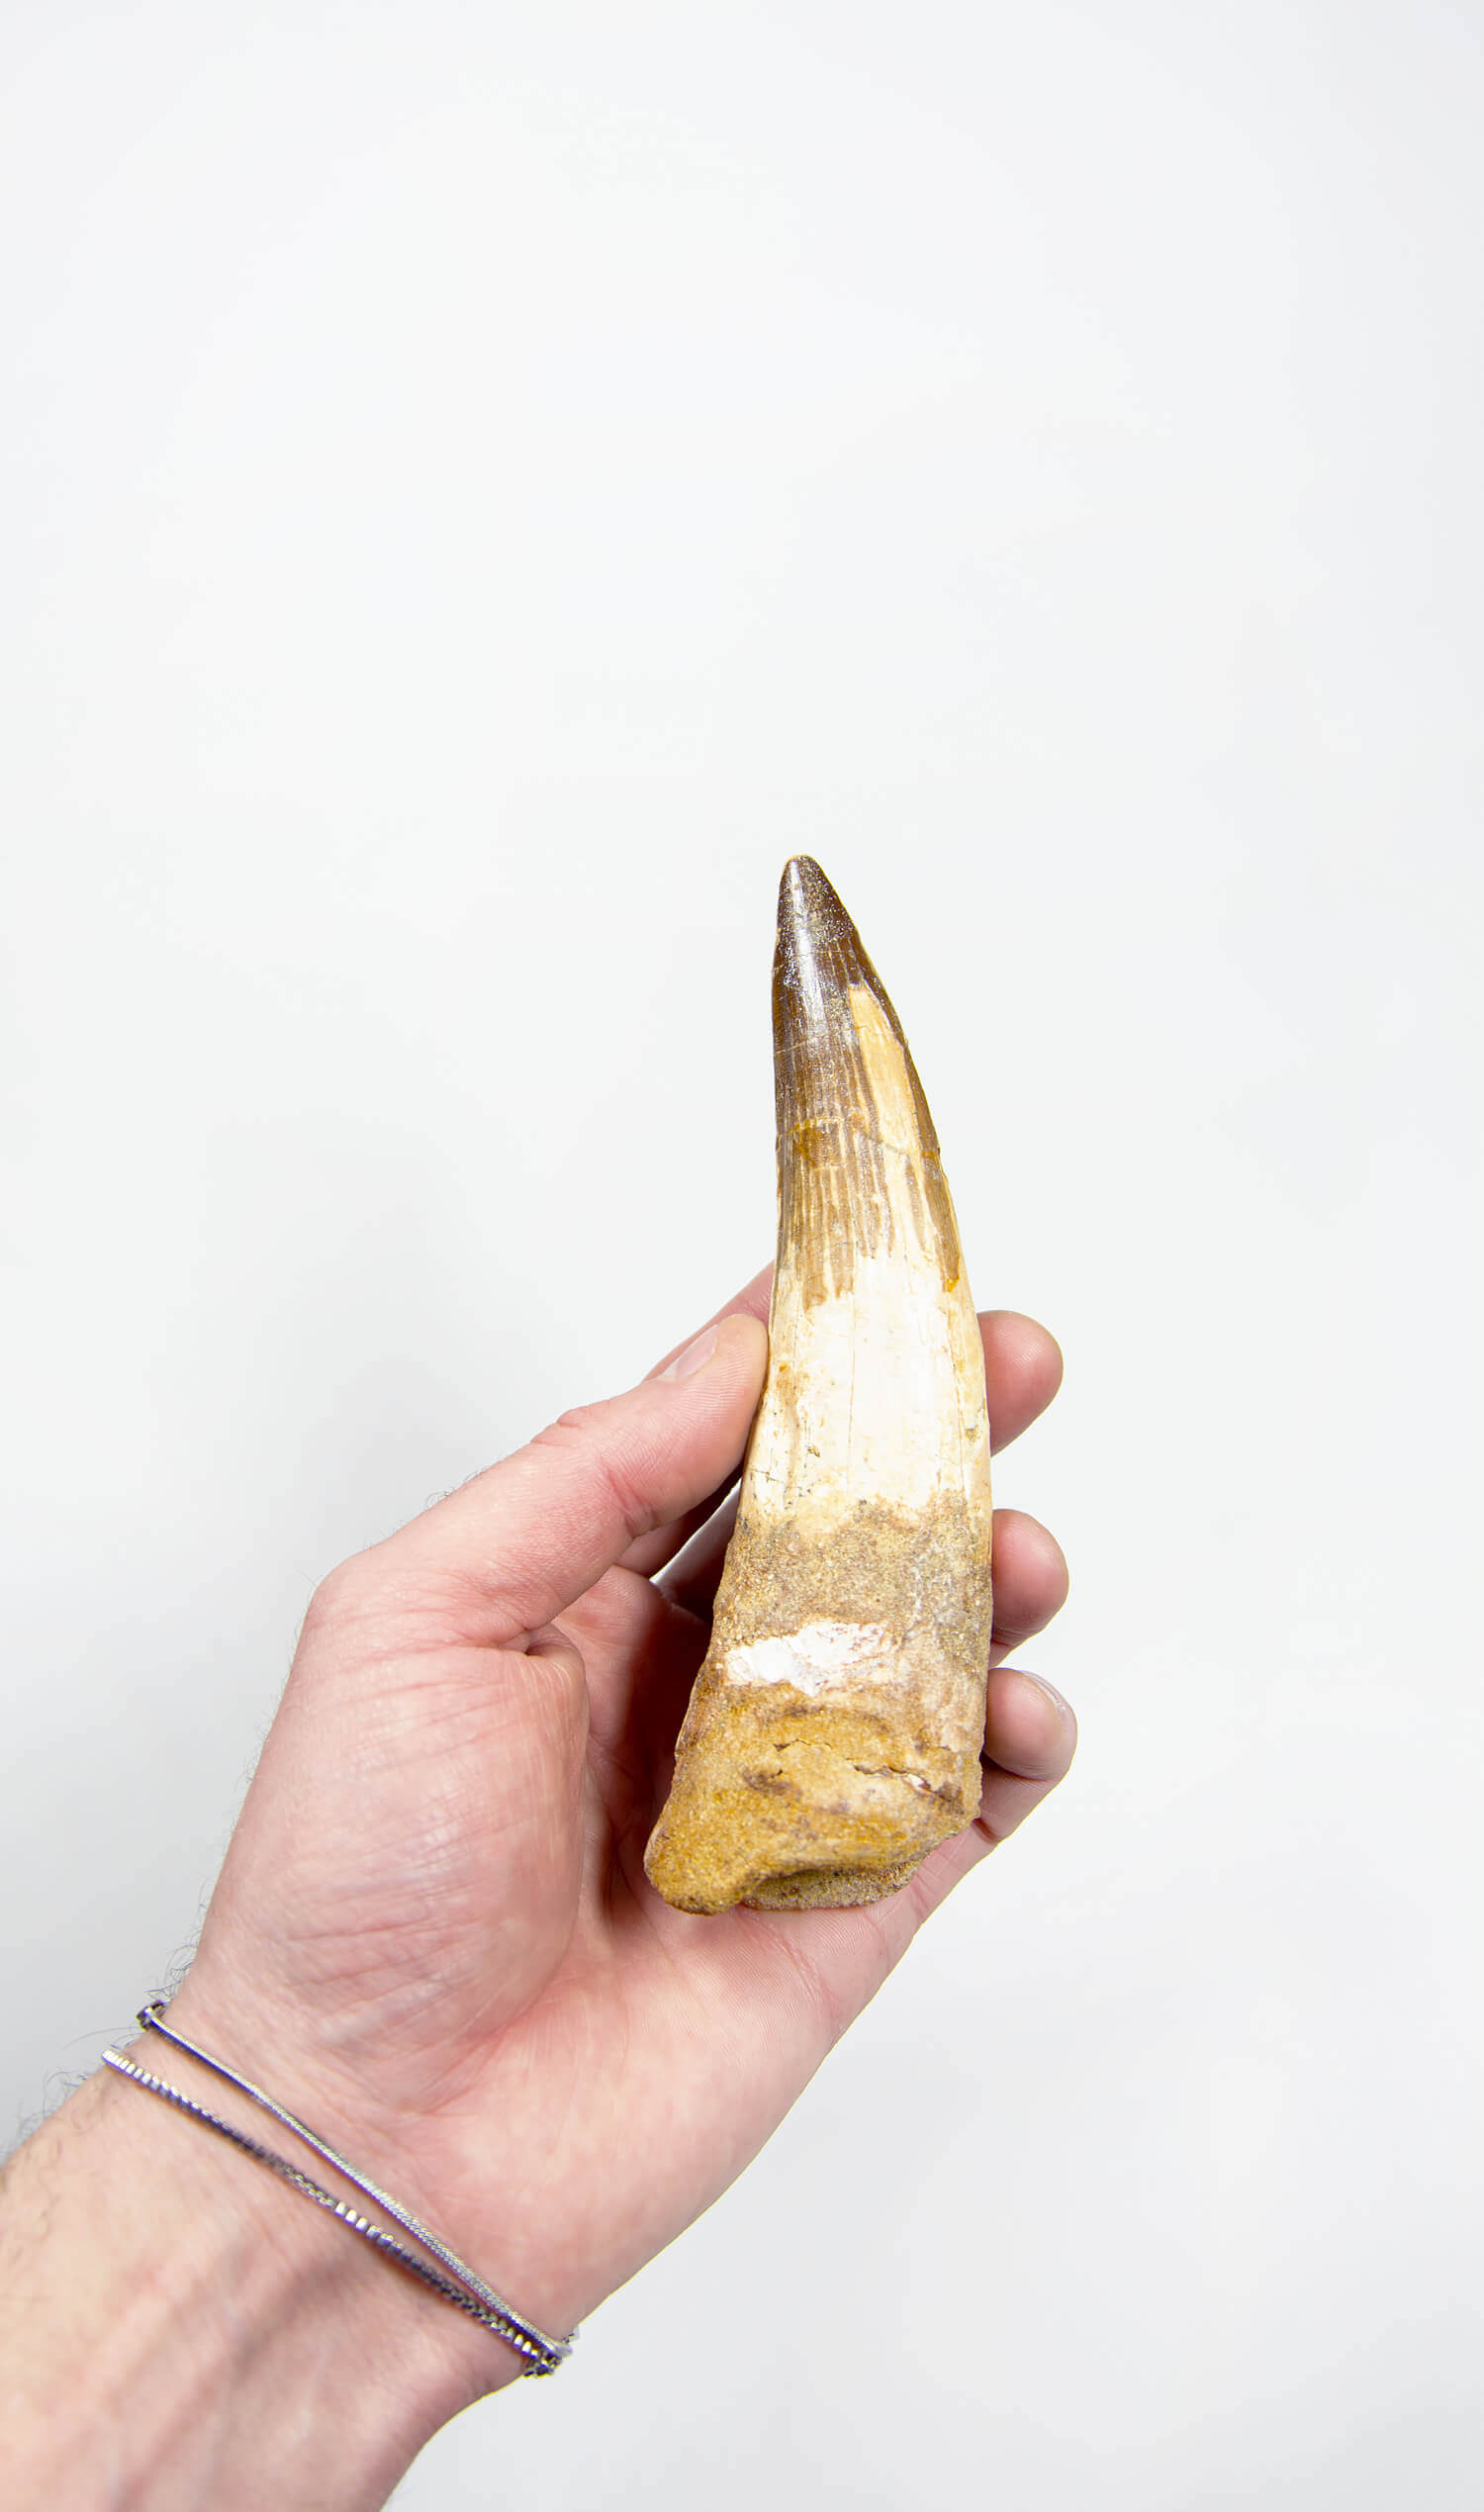 fossil dinosaur spinosaurus tooth for sale at the uk fossil store 148